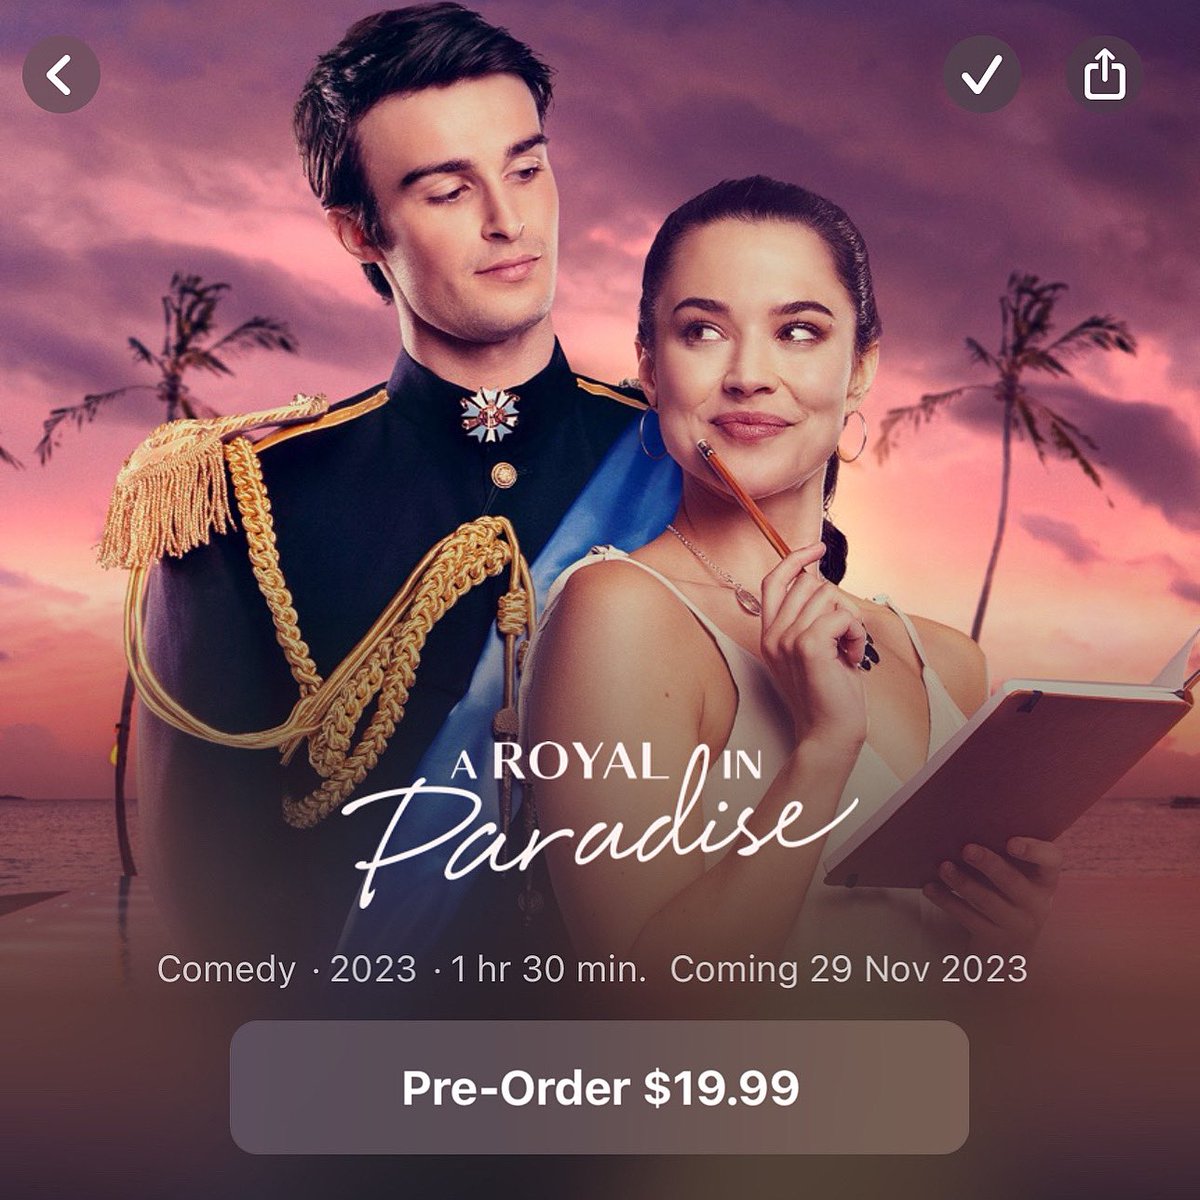 To all our Aussie family, friends and fans, #ARoyalinParadise hits digital small screens on November 29th! Take a journey to the Haven Isles with Olivia and Prince Alexander on Prime Video, Foxtel, Fetch, Telstra, Apple Movies, Google Play and YouTube premium!